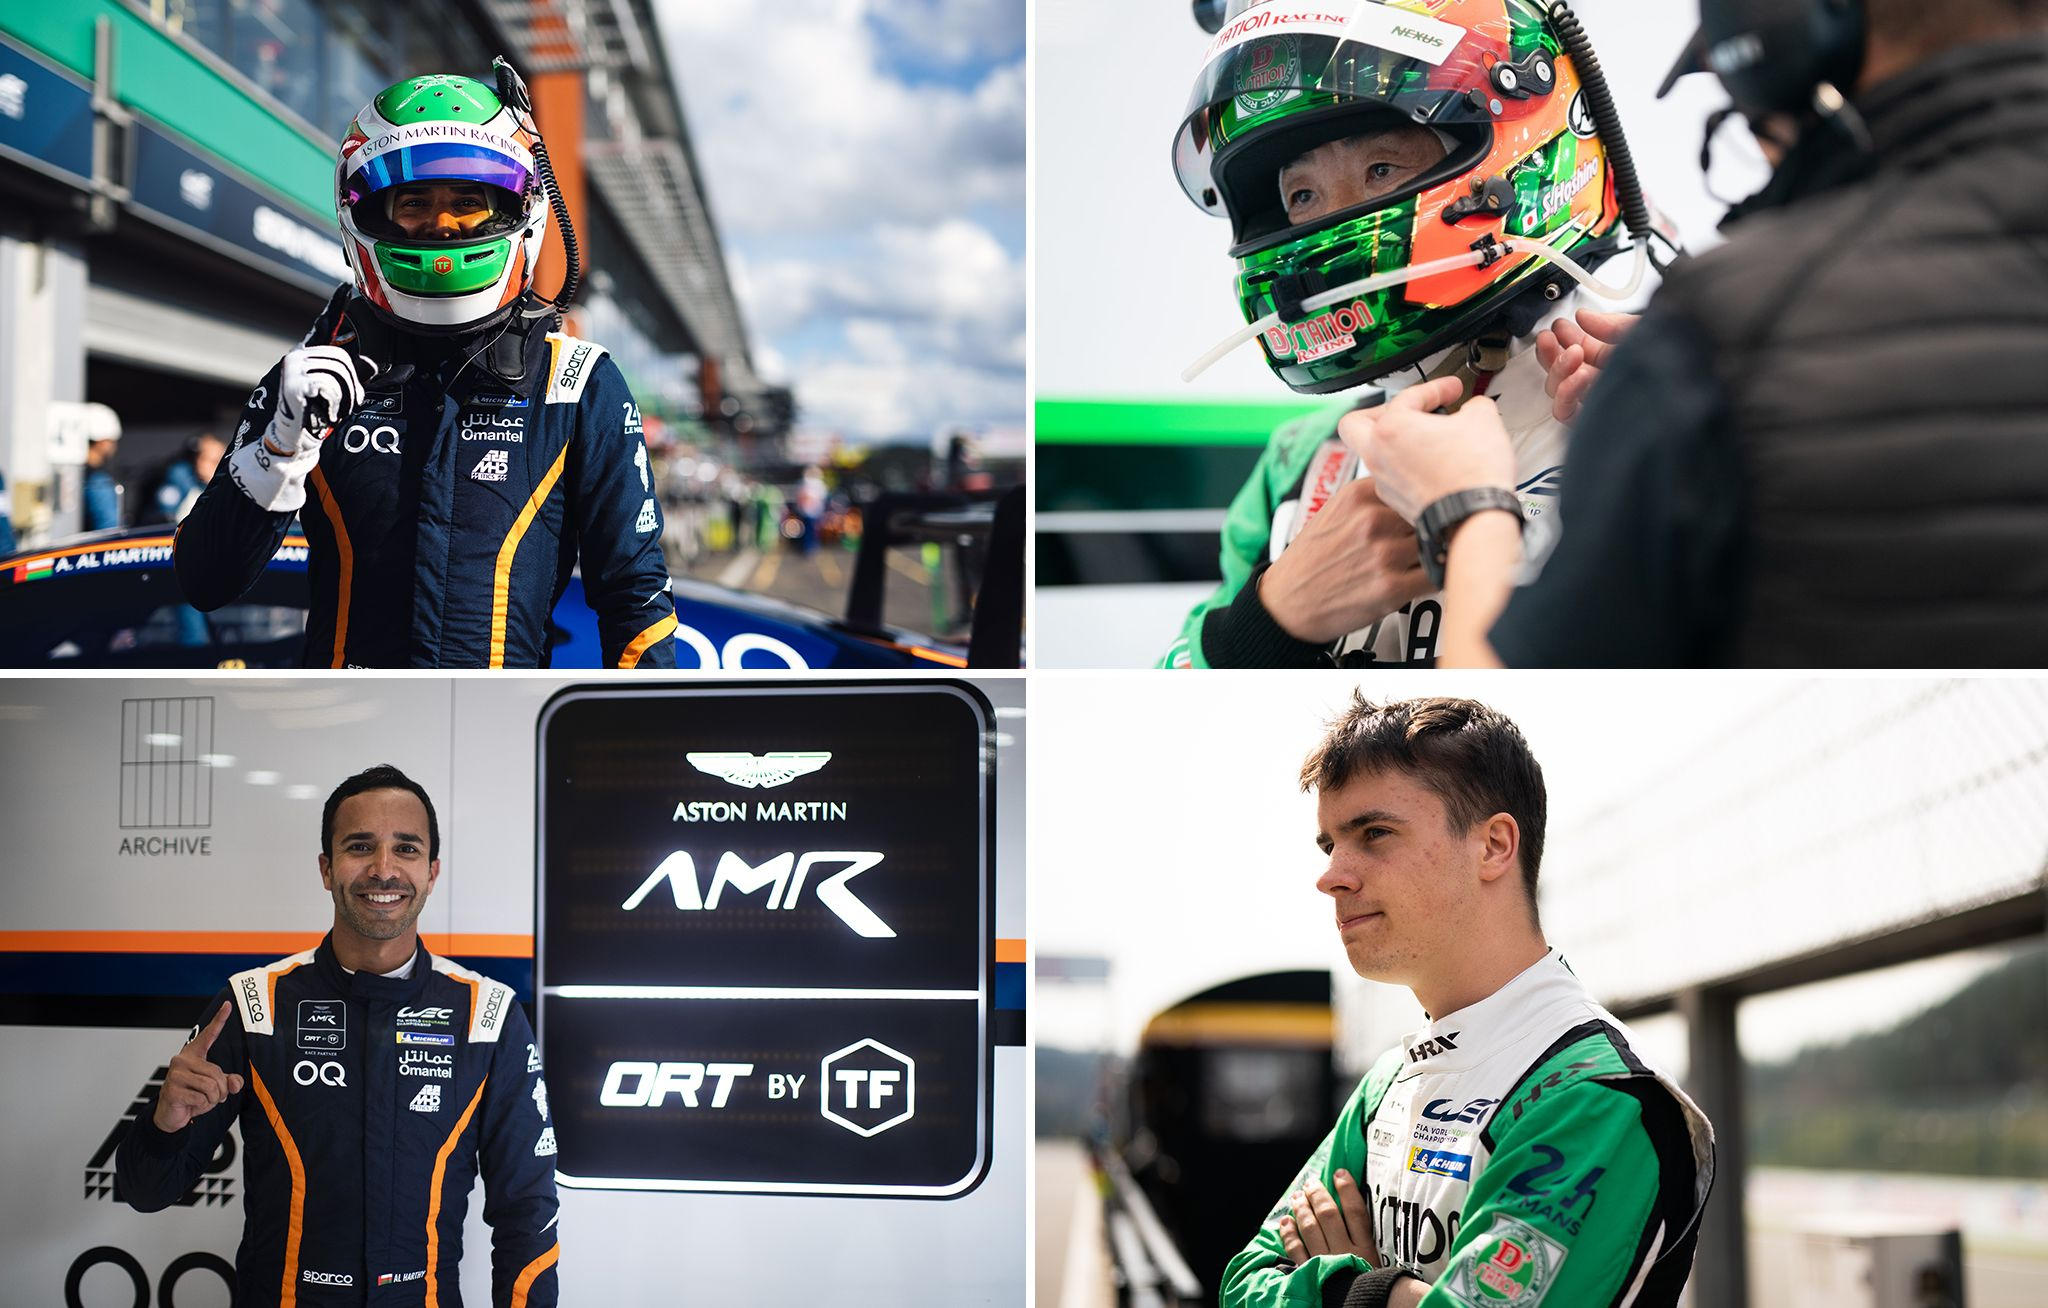 Vantage back on FIA World Endurance Championship podium as ORT by TF makes history at 6 Hours of Spa (3)